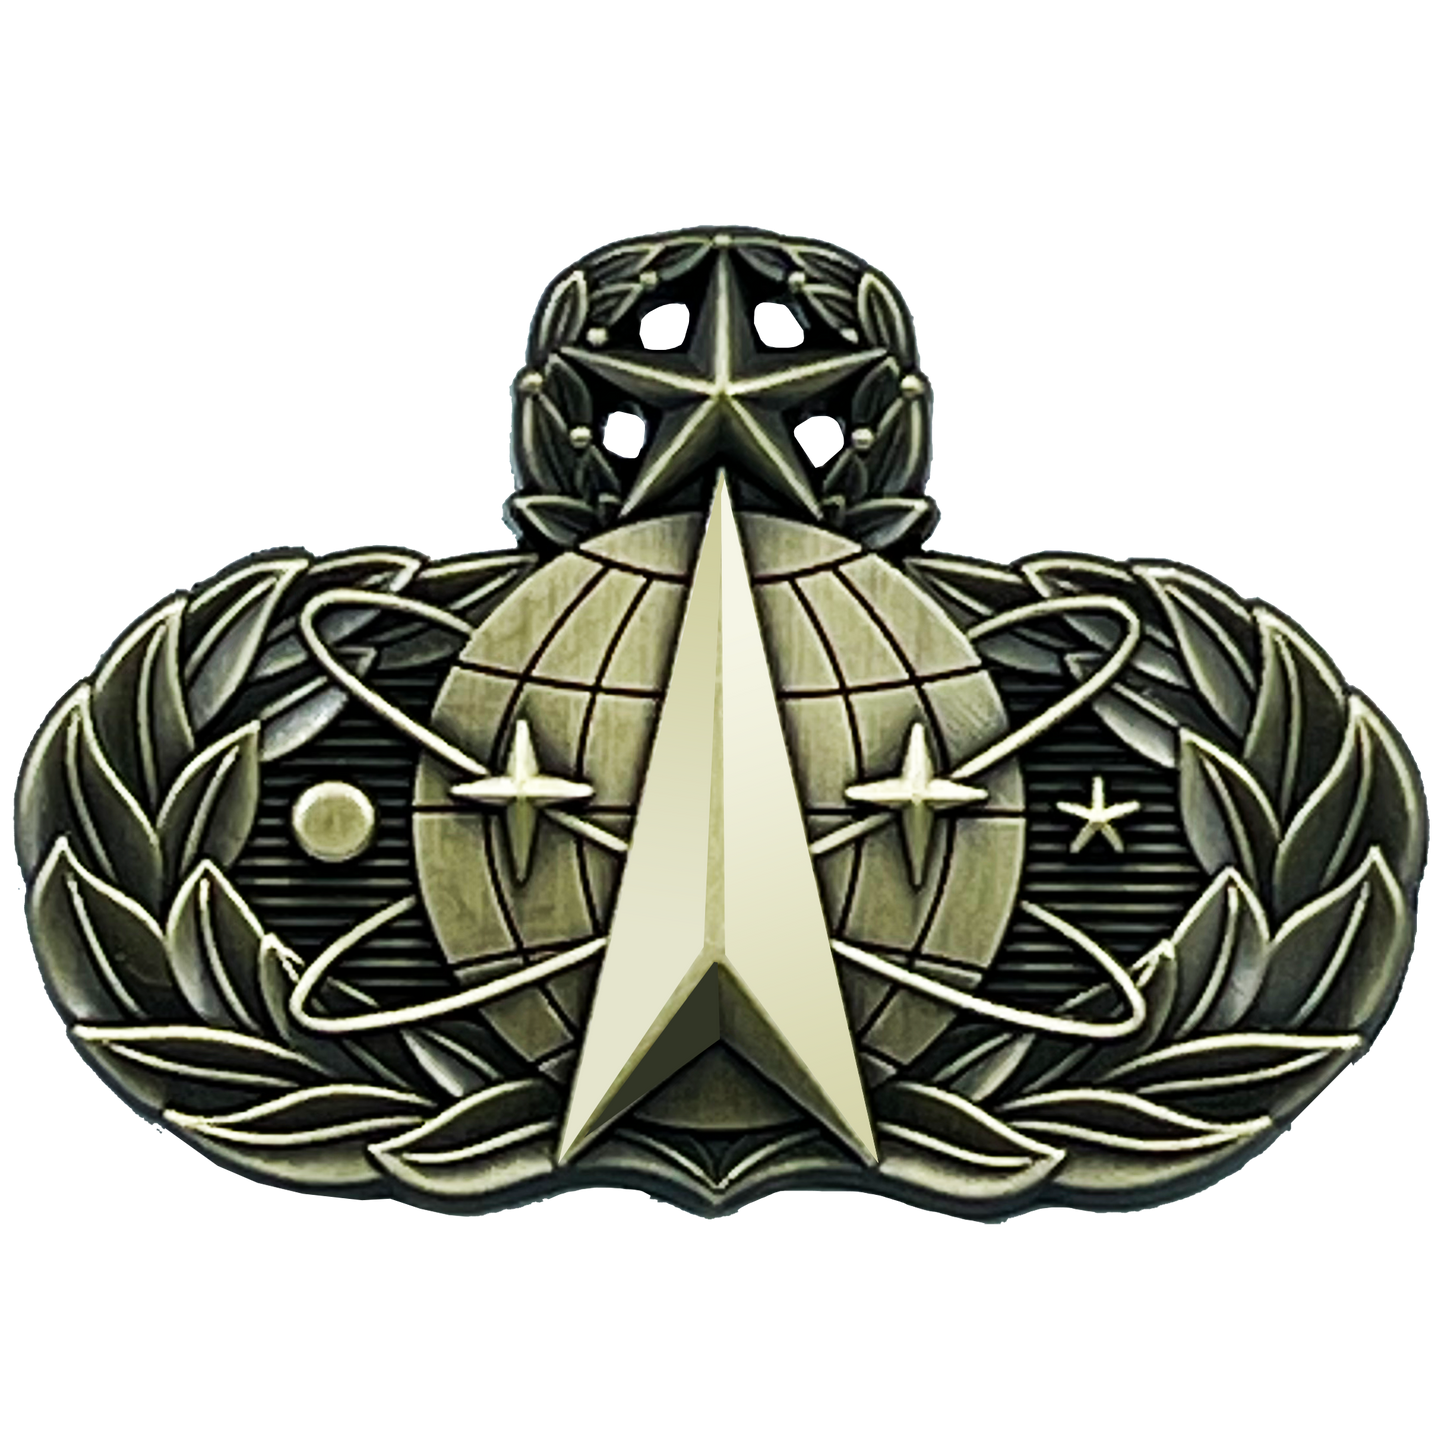 EL2-008 Space Force Ops United States Air Force USAF Master Space Operations Master 1.625" Lapel Pin with dual posts and deluxe locking clasps